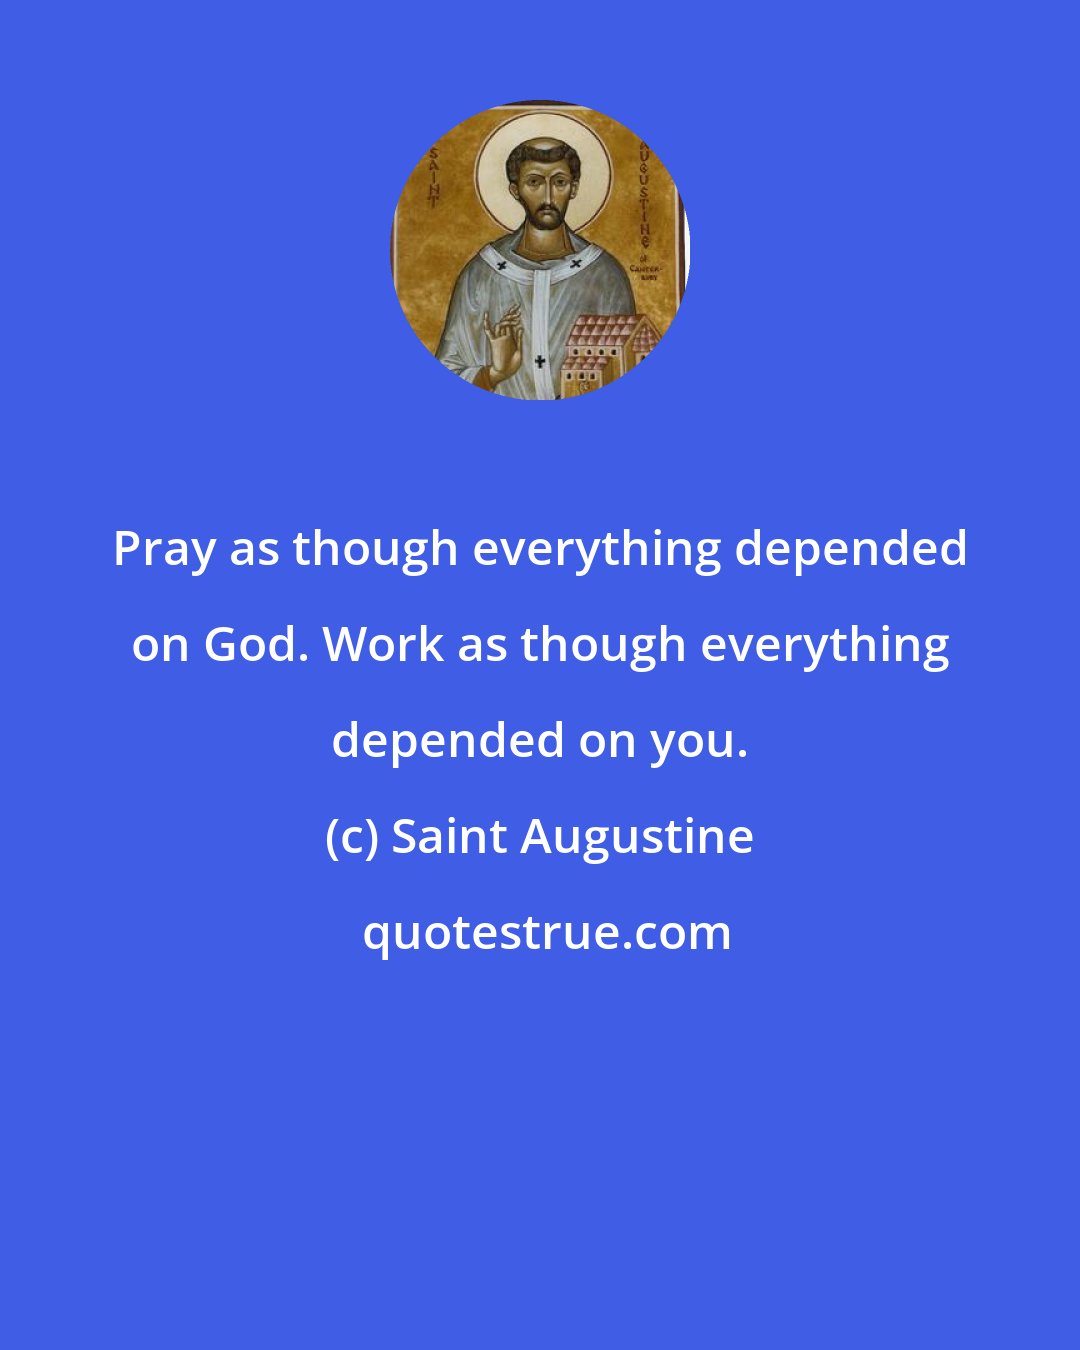 Saint Augustine: Pray as though everything depended on God. Work as though everything depended on you.